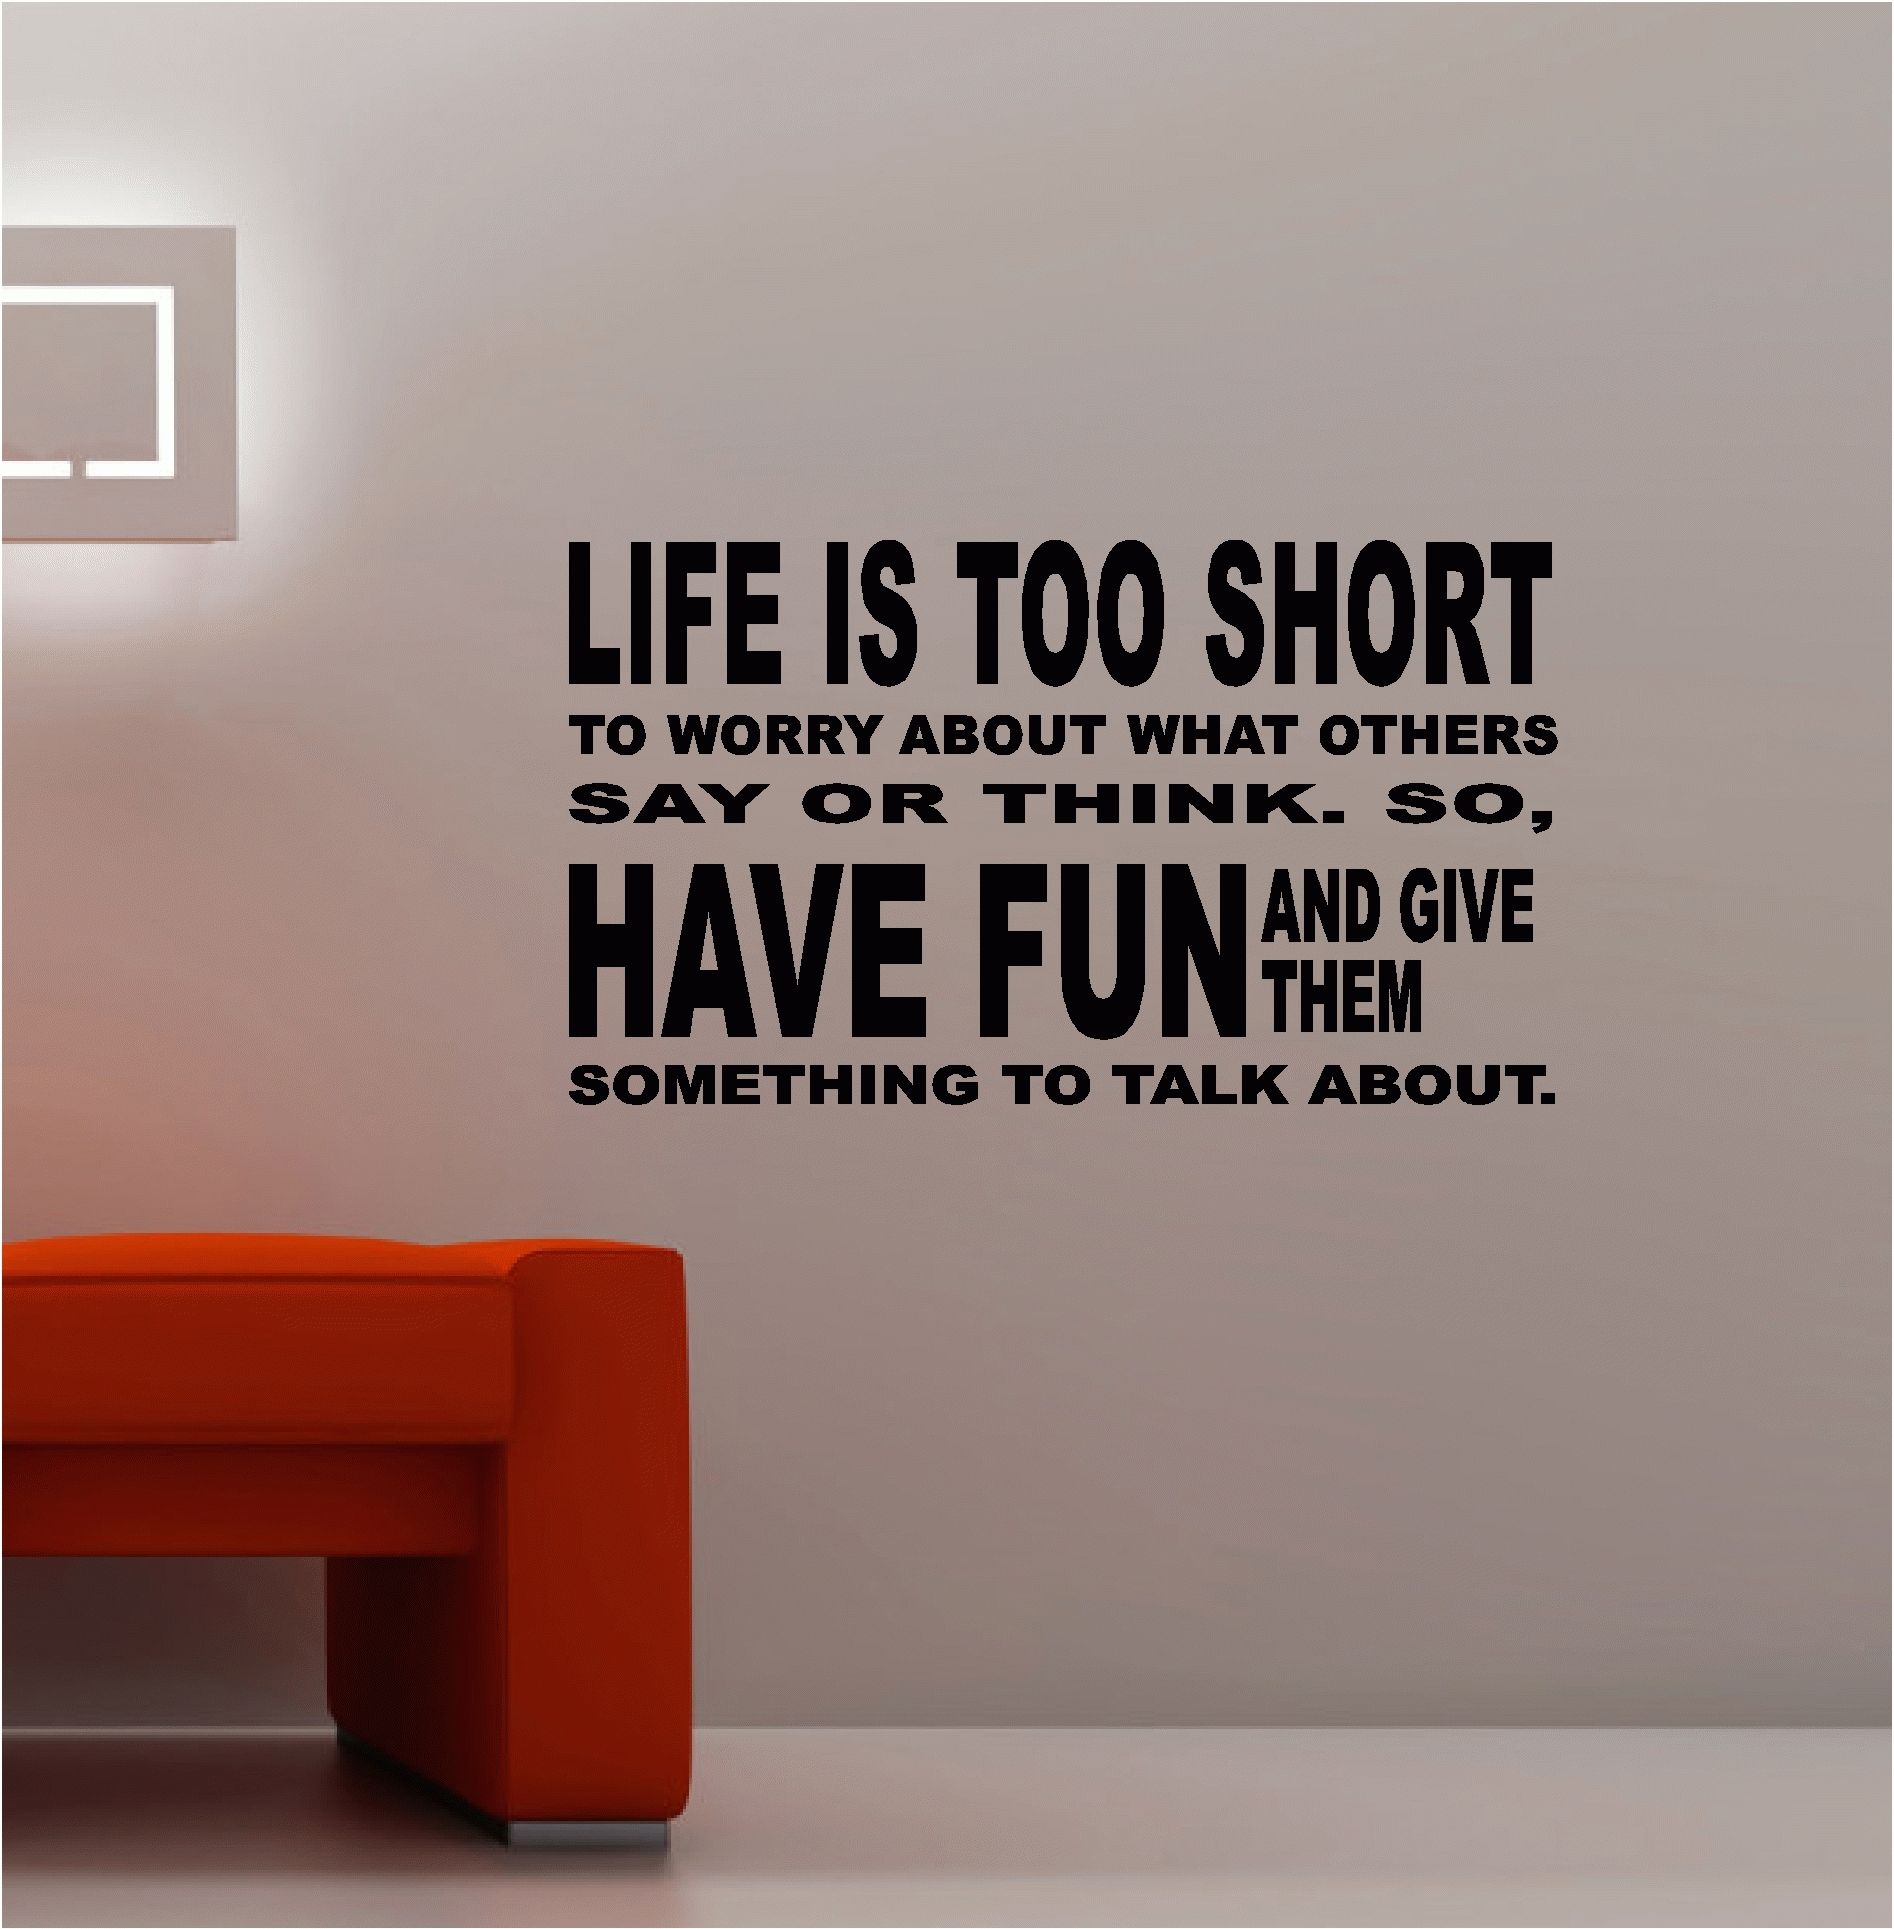 Life Is Too Short Vinyl Wall Art Quote Lounge Kitchen Bedroom | Ebay In Most Current Vinyl Wall Art (View 8 of 15)